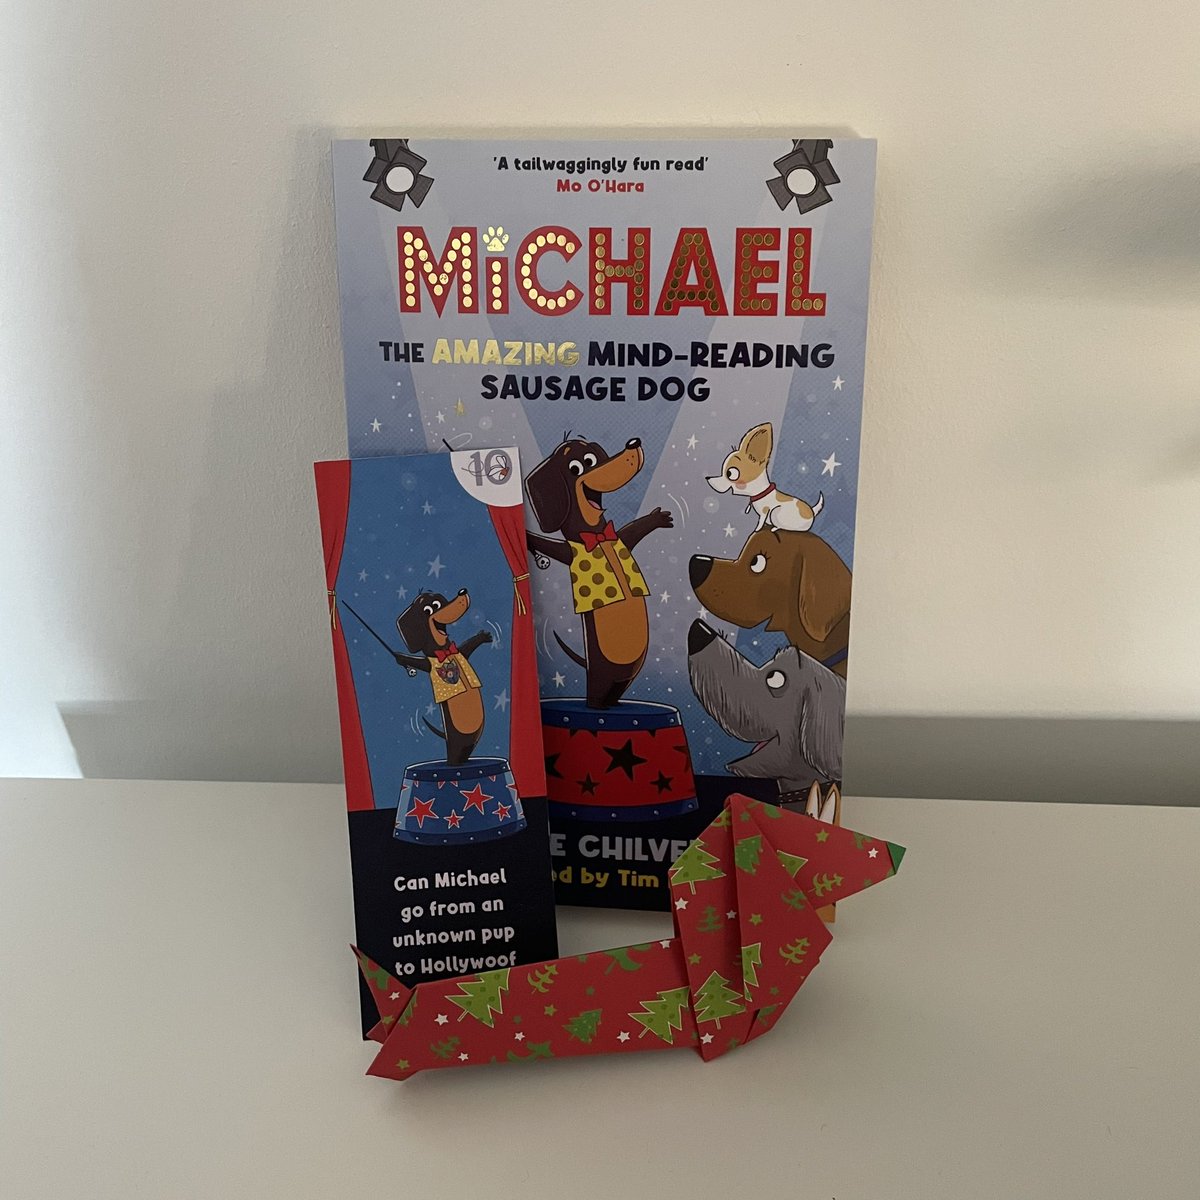 🐶🌭COMPETITION O’CLOCK 🐶🌭I’m giving away a festive Michael bundle including a copy of Michael the Amazing Mind-reading Sausage Dog, a Michael bookmark and origami Christmas dachshund! Follow me + Michael's illustrator, @mrtimdraws + RT by Dec 3rd, 8pm to enter. UK+Eire only.